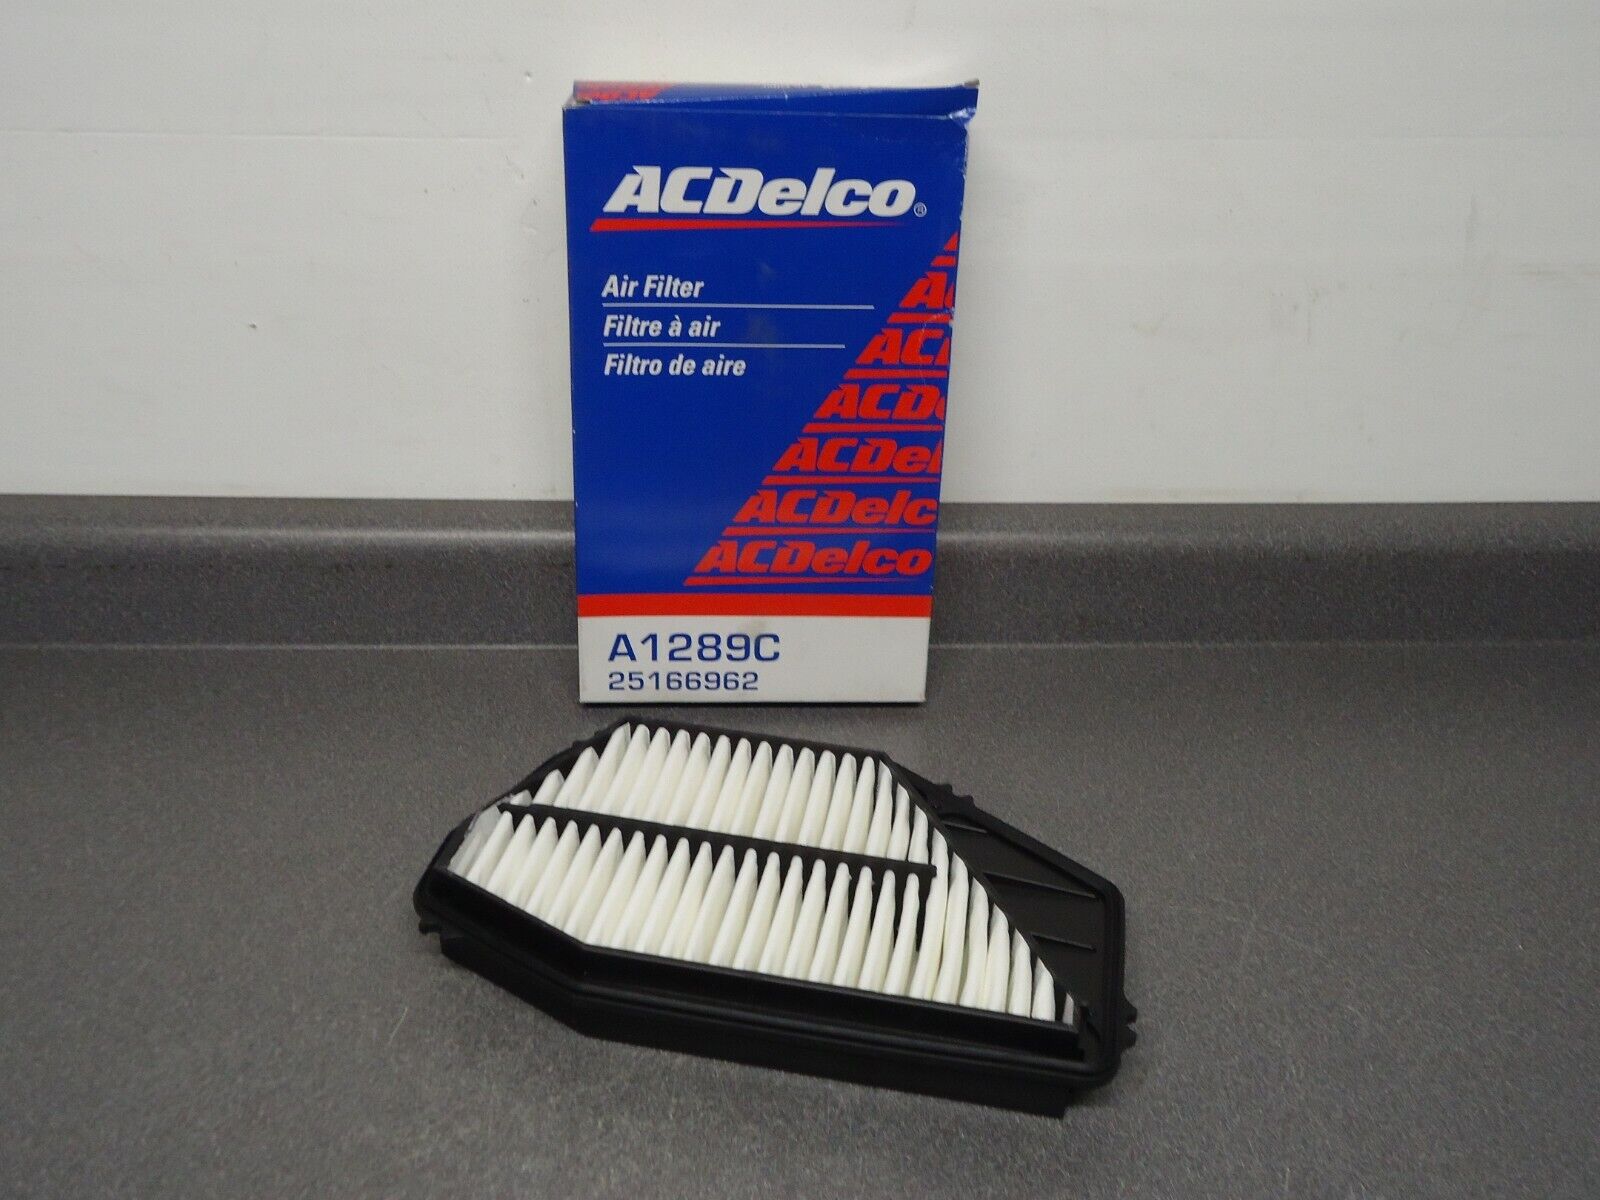 New NOS AcDelco Air Filter A1289C 25166962 Fits Acura CL Honda Accord